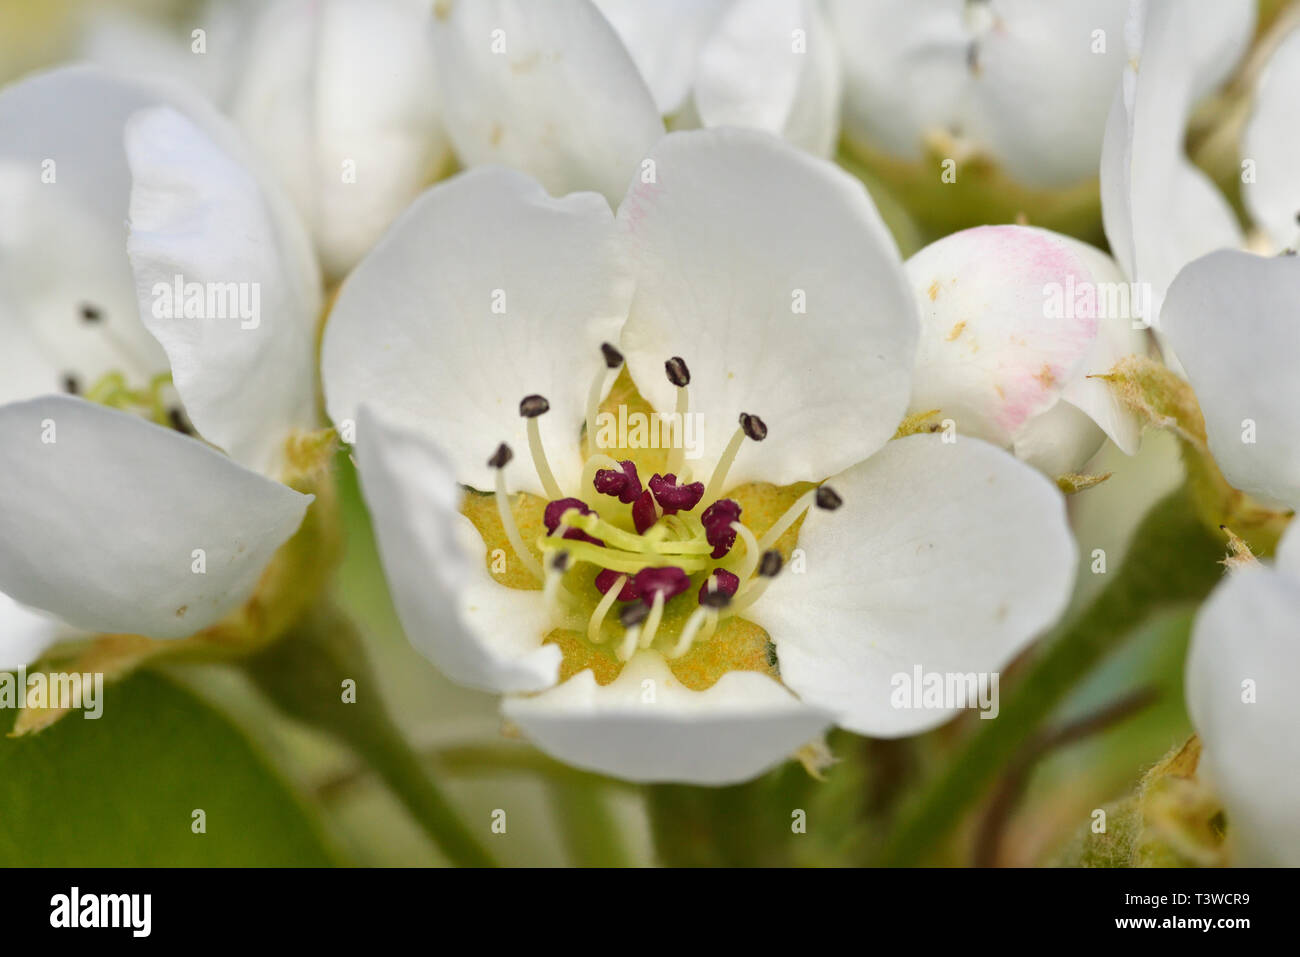 Close up of blossoms on pear tree (Pyrus communis), common pear Stock Photo